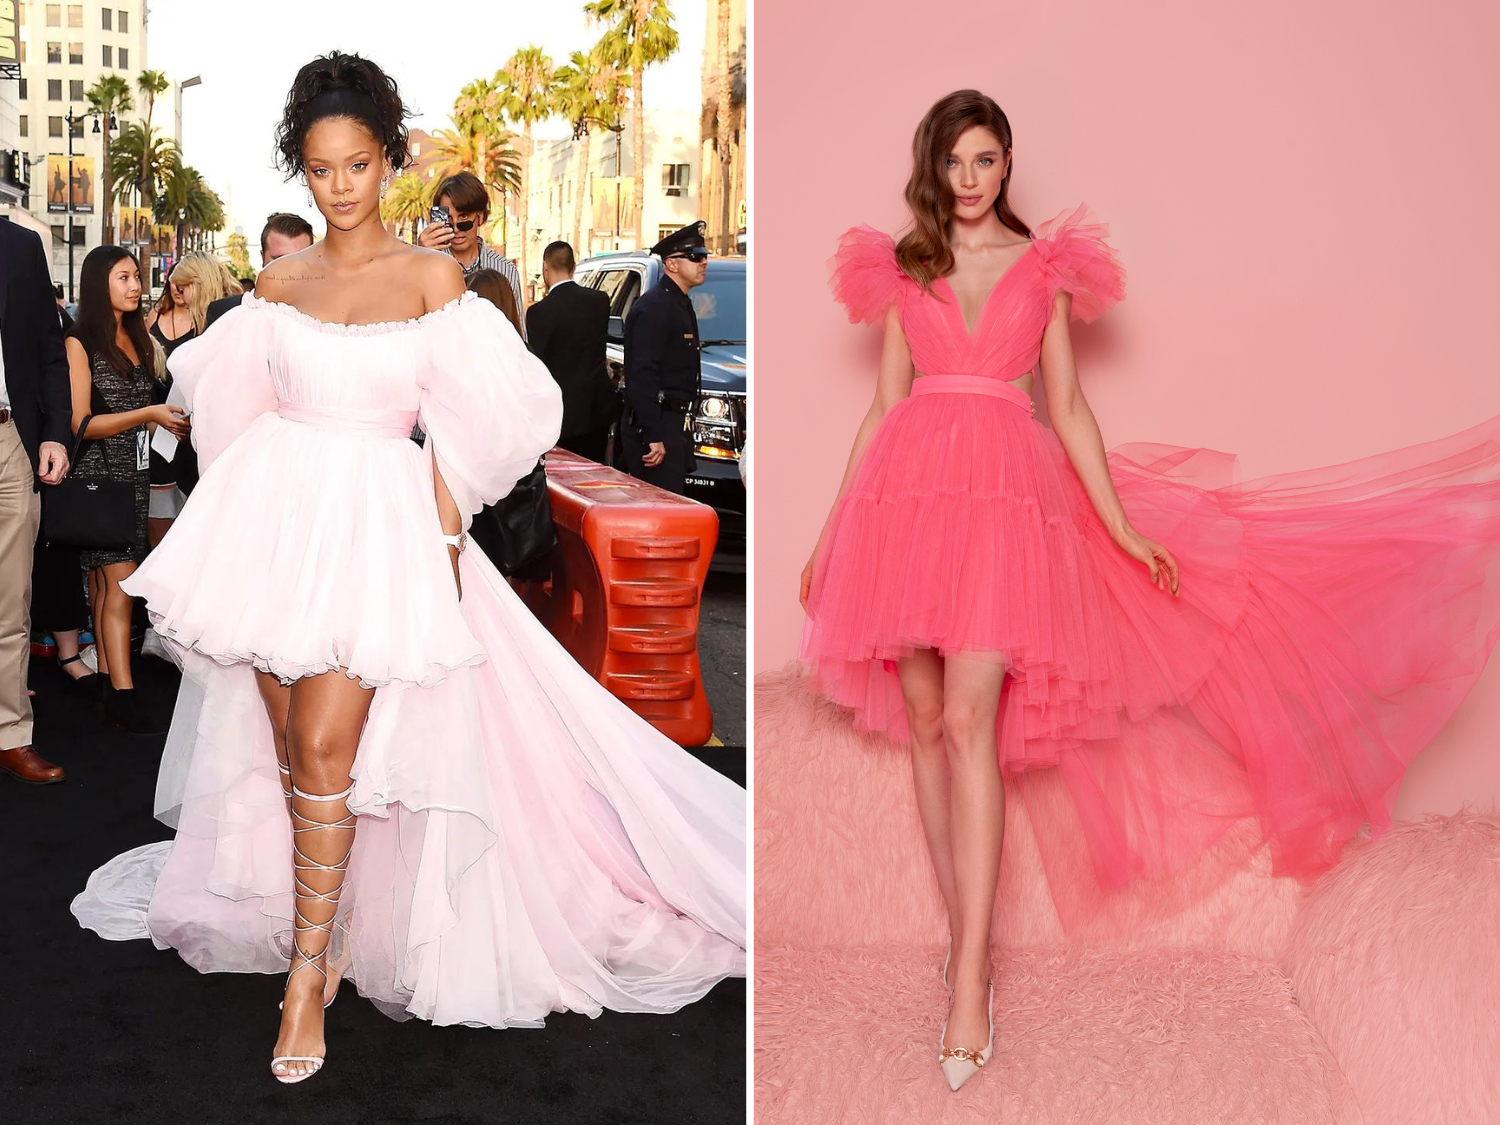 Two women showcasing prom dresses. On the left, Rhiana in pink gown from the premiere of "Valerian and the City of a Thousand Planets" stands outdoors with an off-shoulder, light pink dress that has puffy sleeves and a ruffled hem extending into a train, paired with strappy heels. On the right, a prom dress from Papilio Boutique in Toronto displays a striking pink hue with playful ruffles, a plunging neckline, and a whimsical tulle skirt with an elegant train, embodying a blend of modern style and fairytale charm.